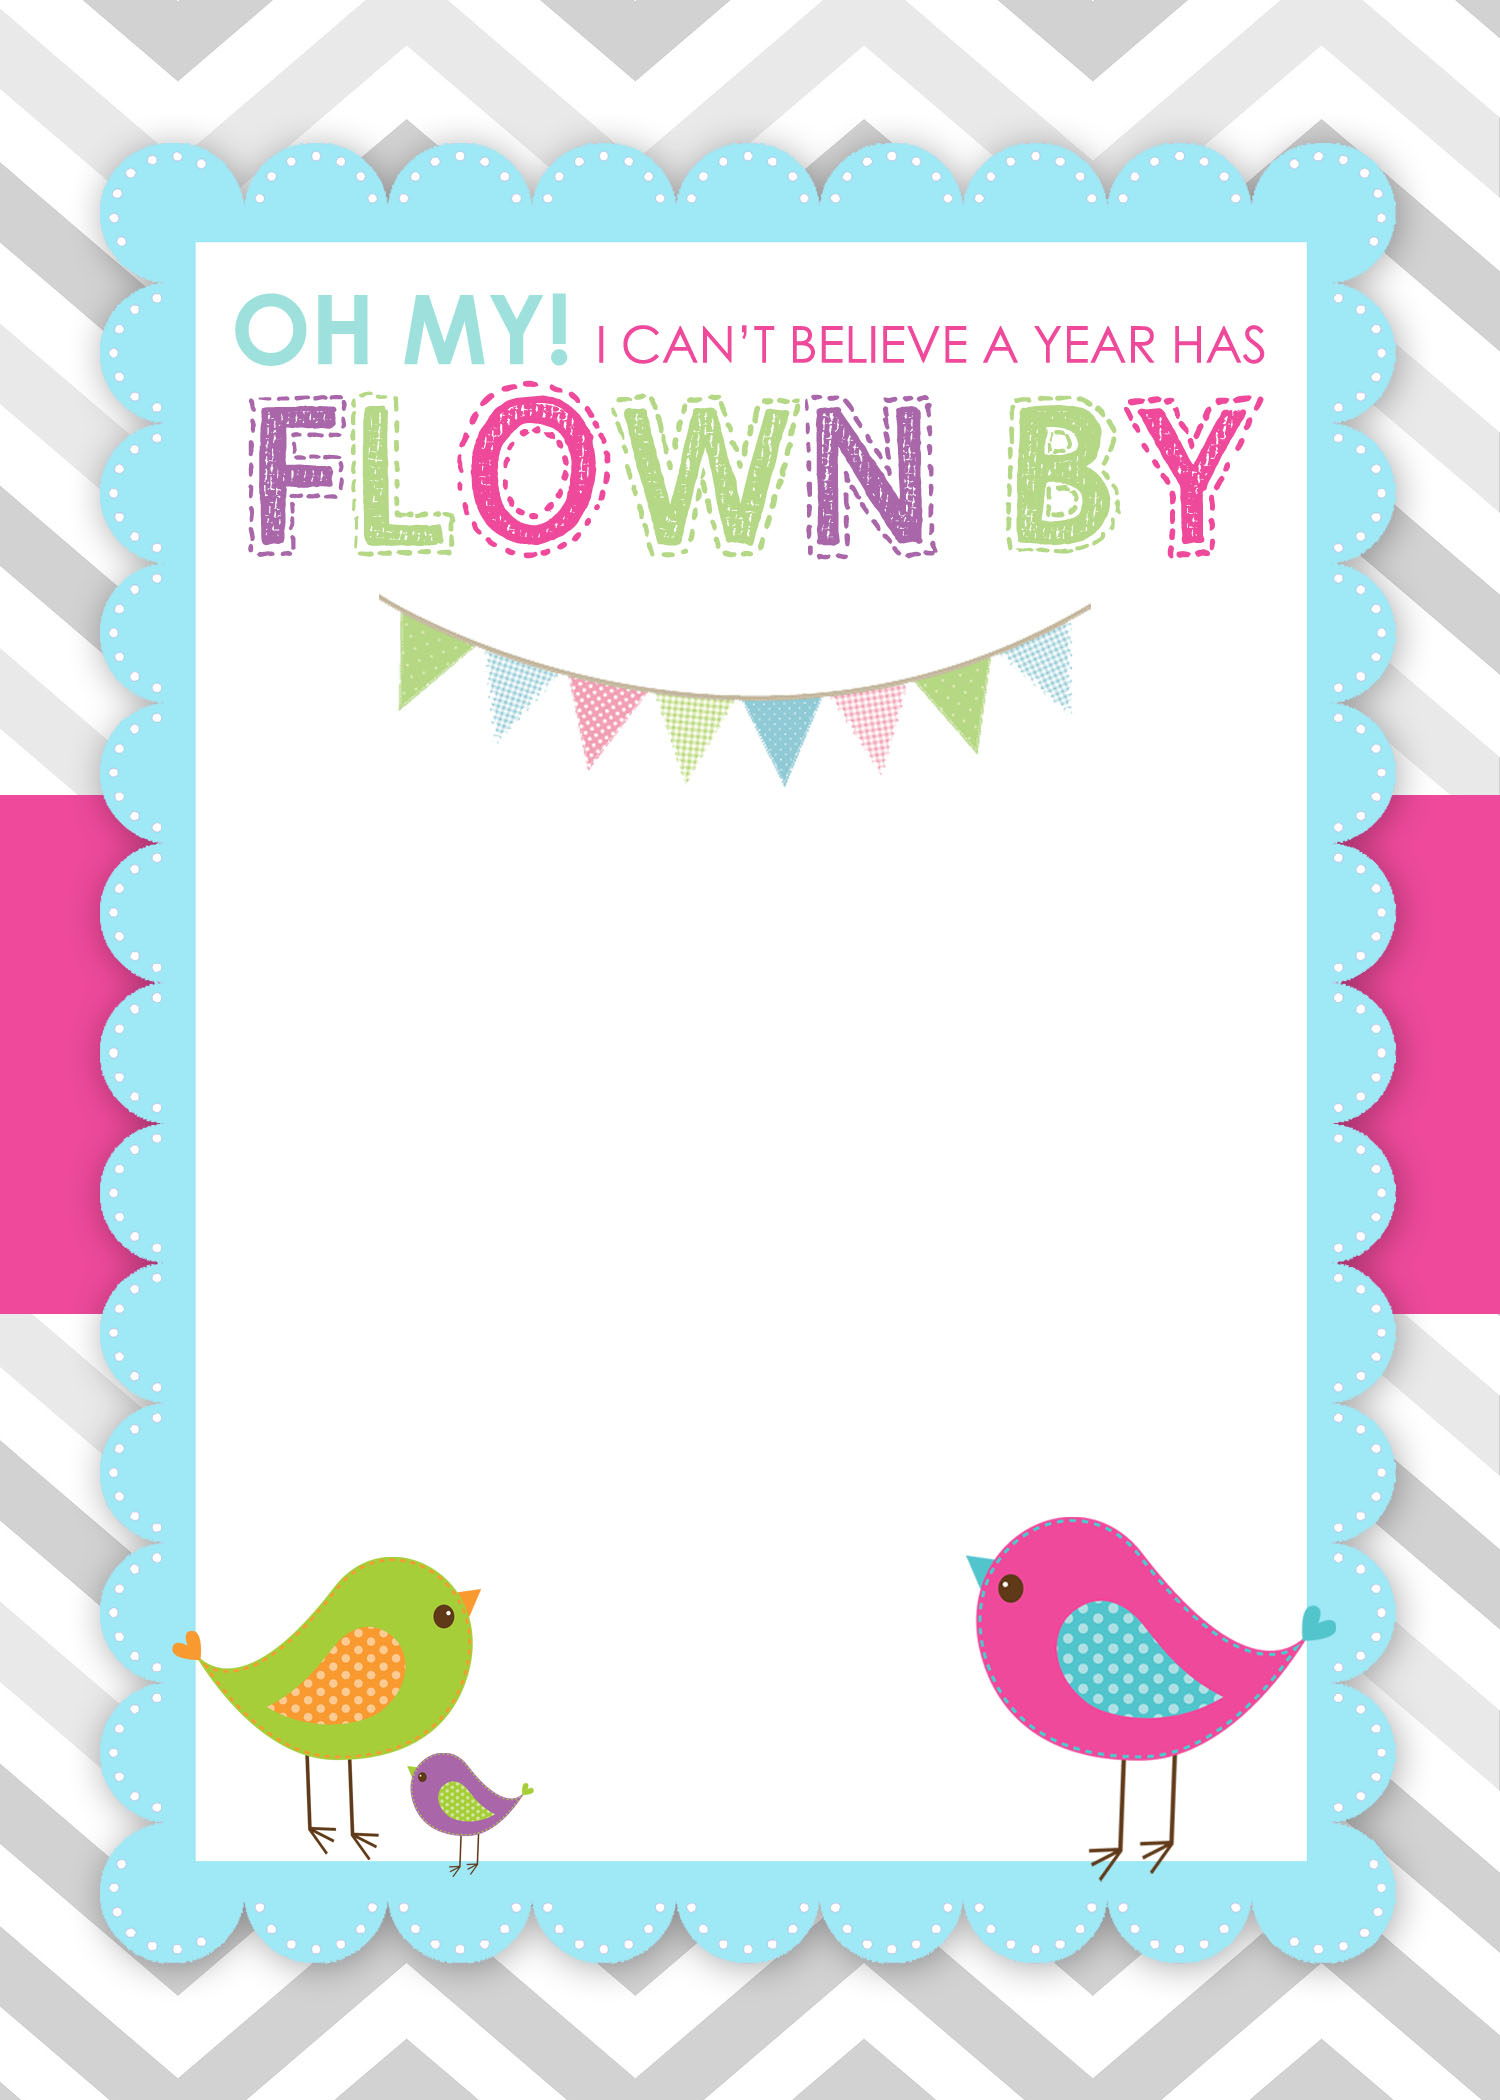 Bird Birthday Party With Free Printables - How To Nest For Less™ - Free Printable Polka Dot Birthday Party Invitations